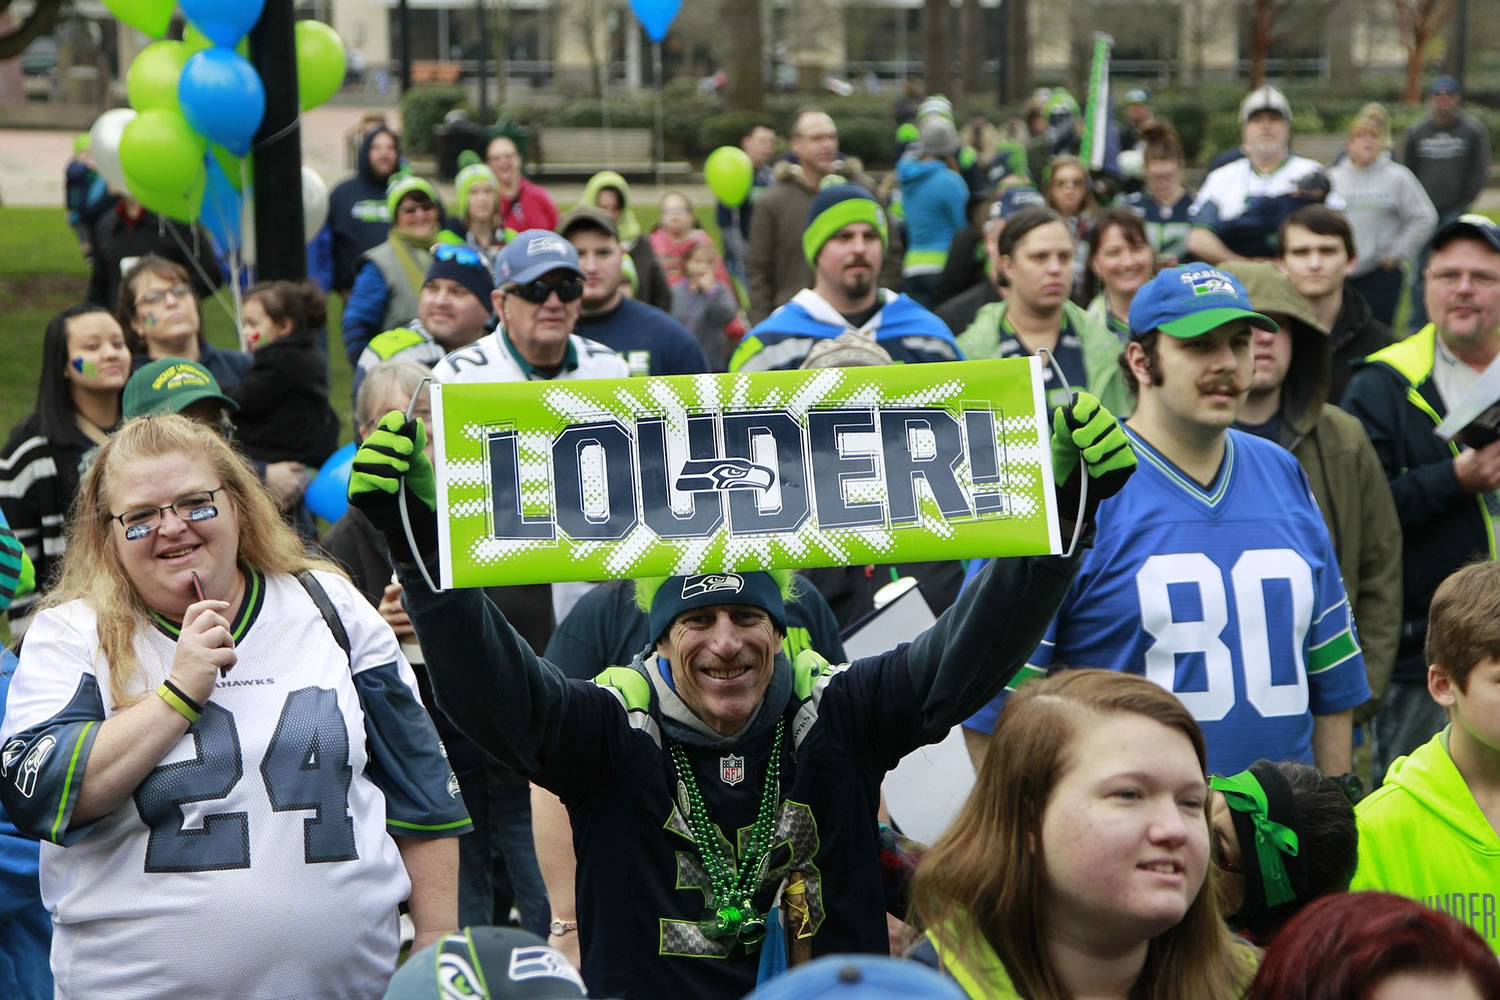 Fans of the Seattle Seahawks gather Saturday in Esther Short Park for a  12th man fan rally in advance of Sunday's Super Bowl.